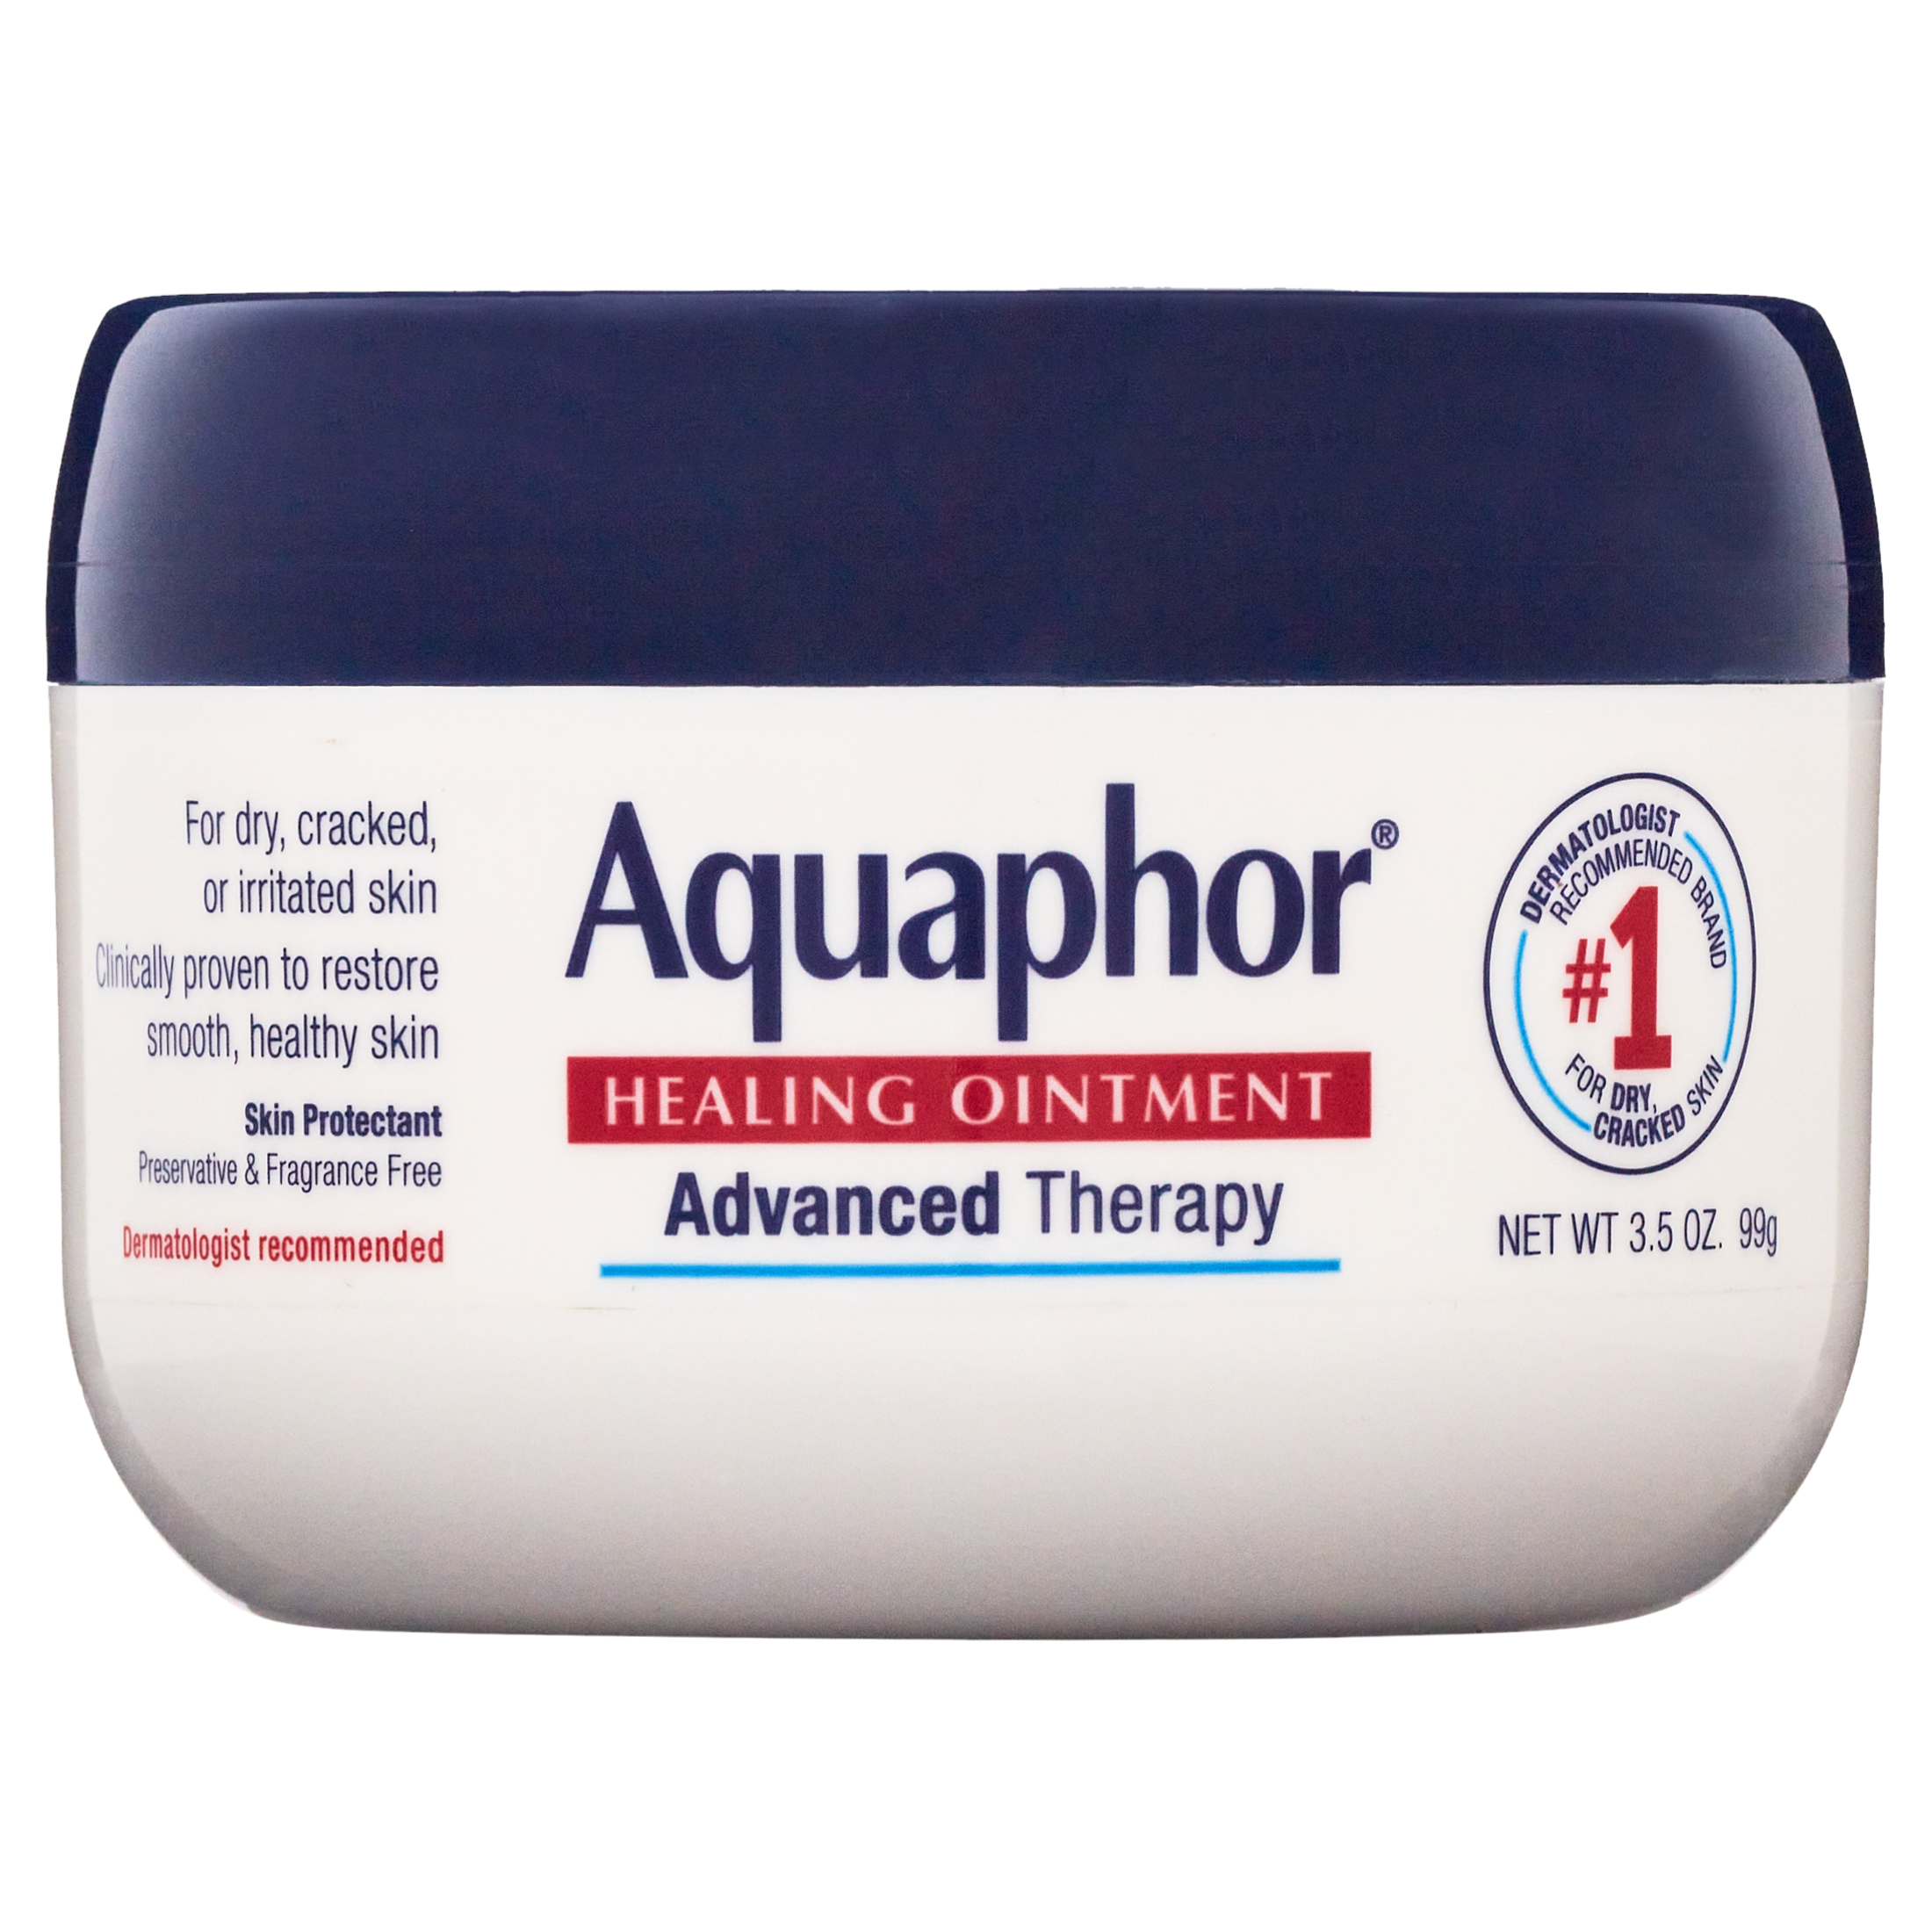 Aquaphor Healing Ointment Advanced Therapy Skin Protectant, 3.5 Oz Jar - image 1 of 19